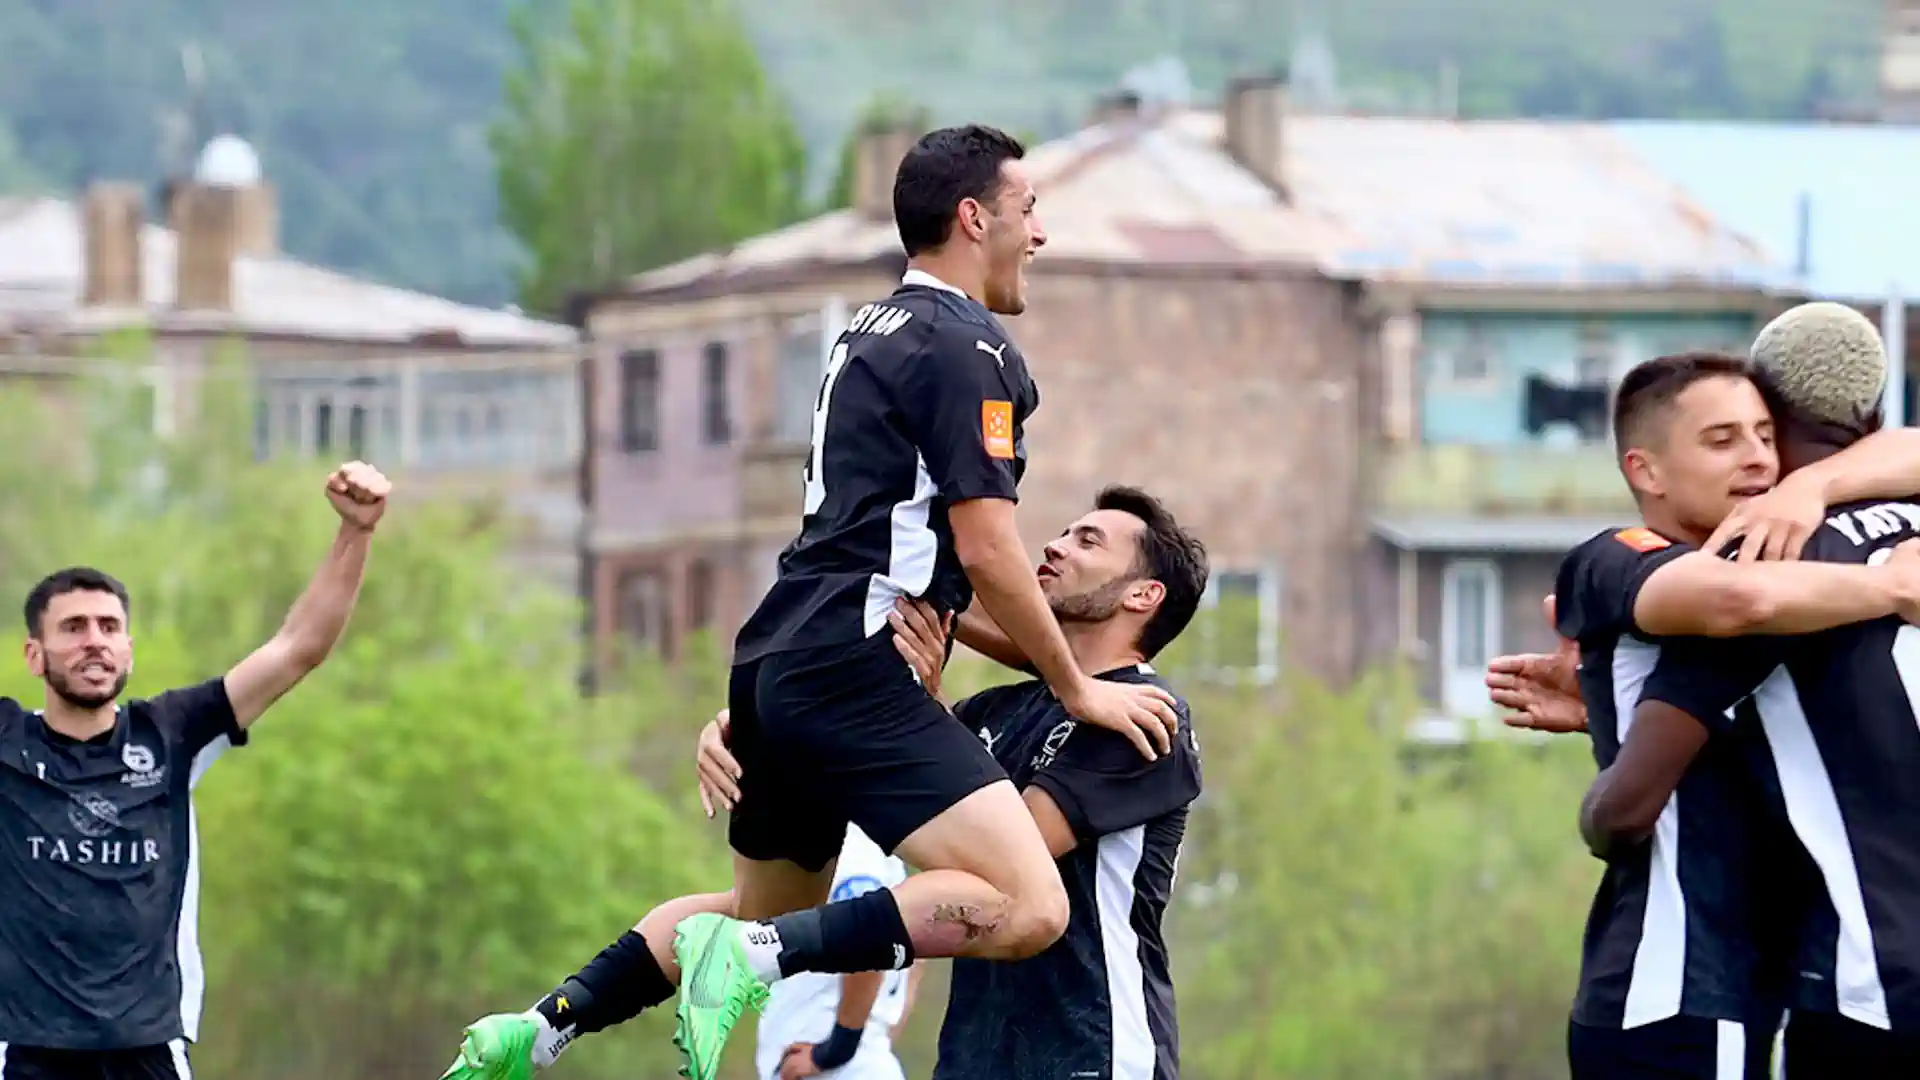 Jirayr Shaghoyan scored for the first time in a year and a half. And how he scored! Simply gorgeous (video)